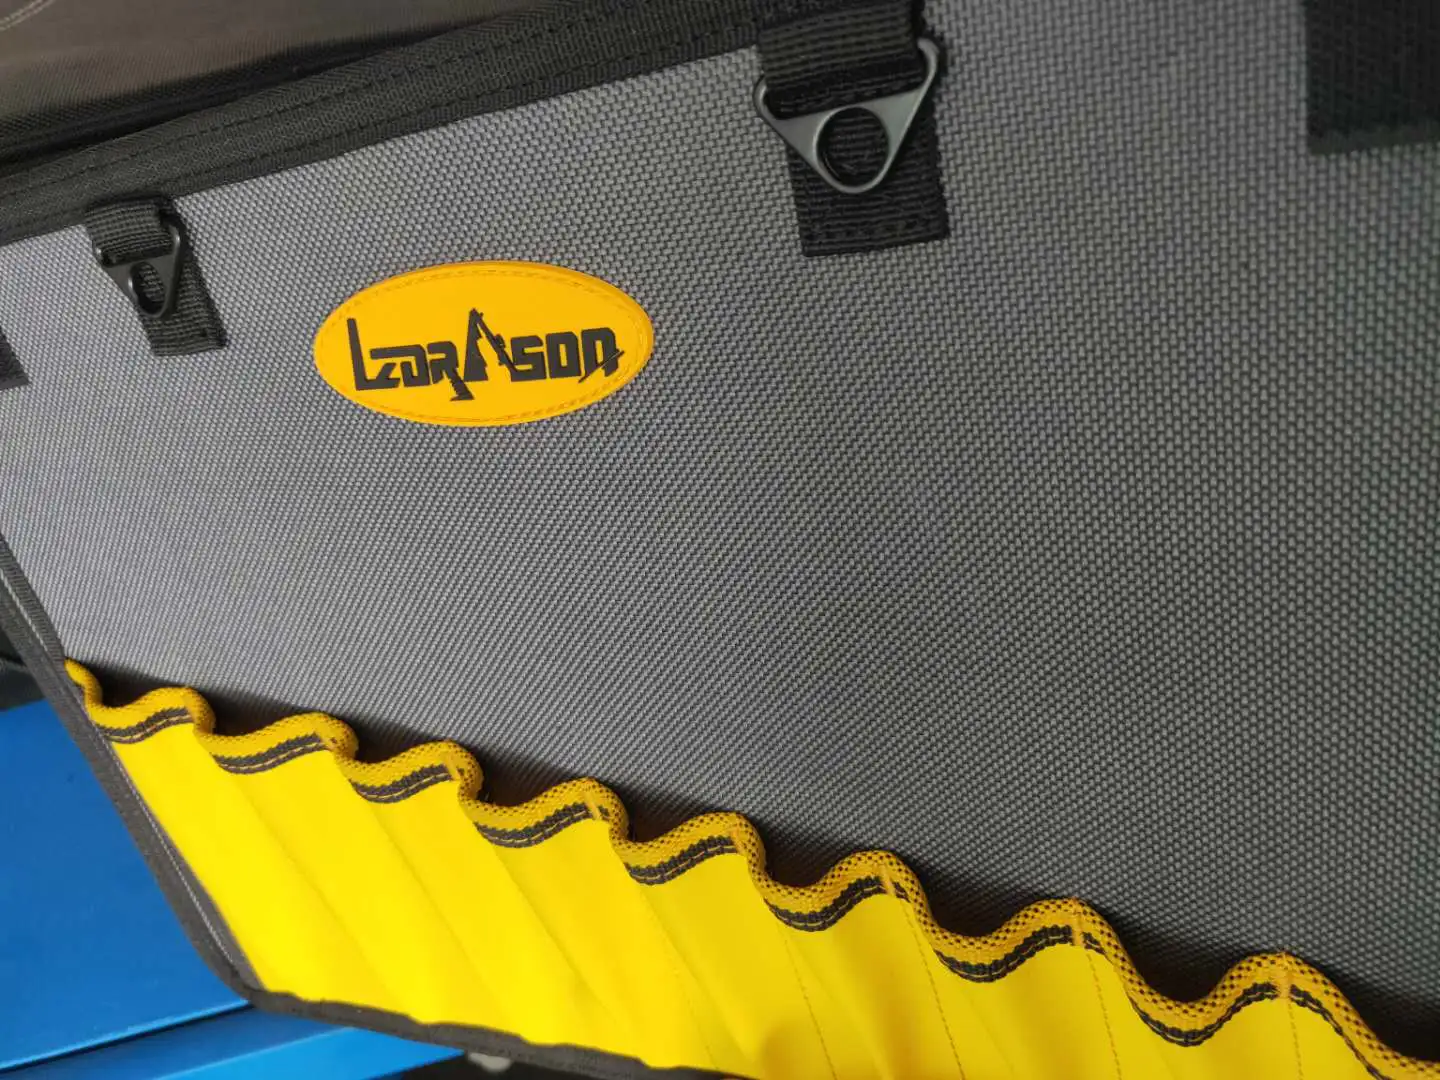 Lzdrason tool tote bag wholesale online shopping for technician